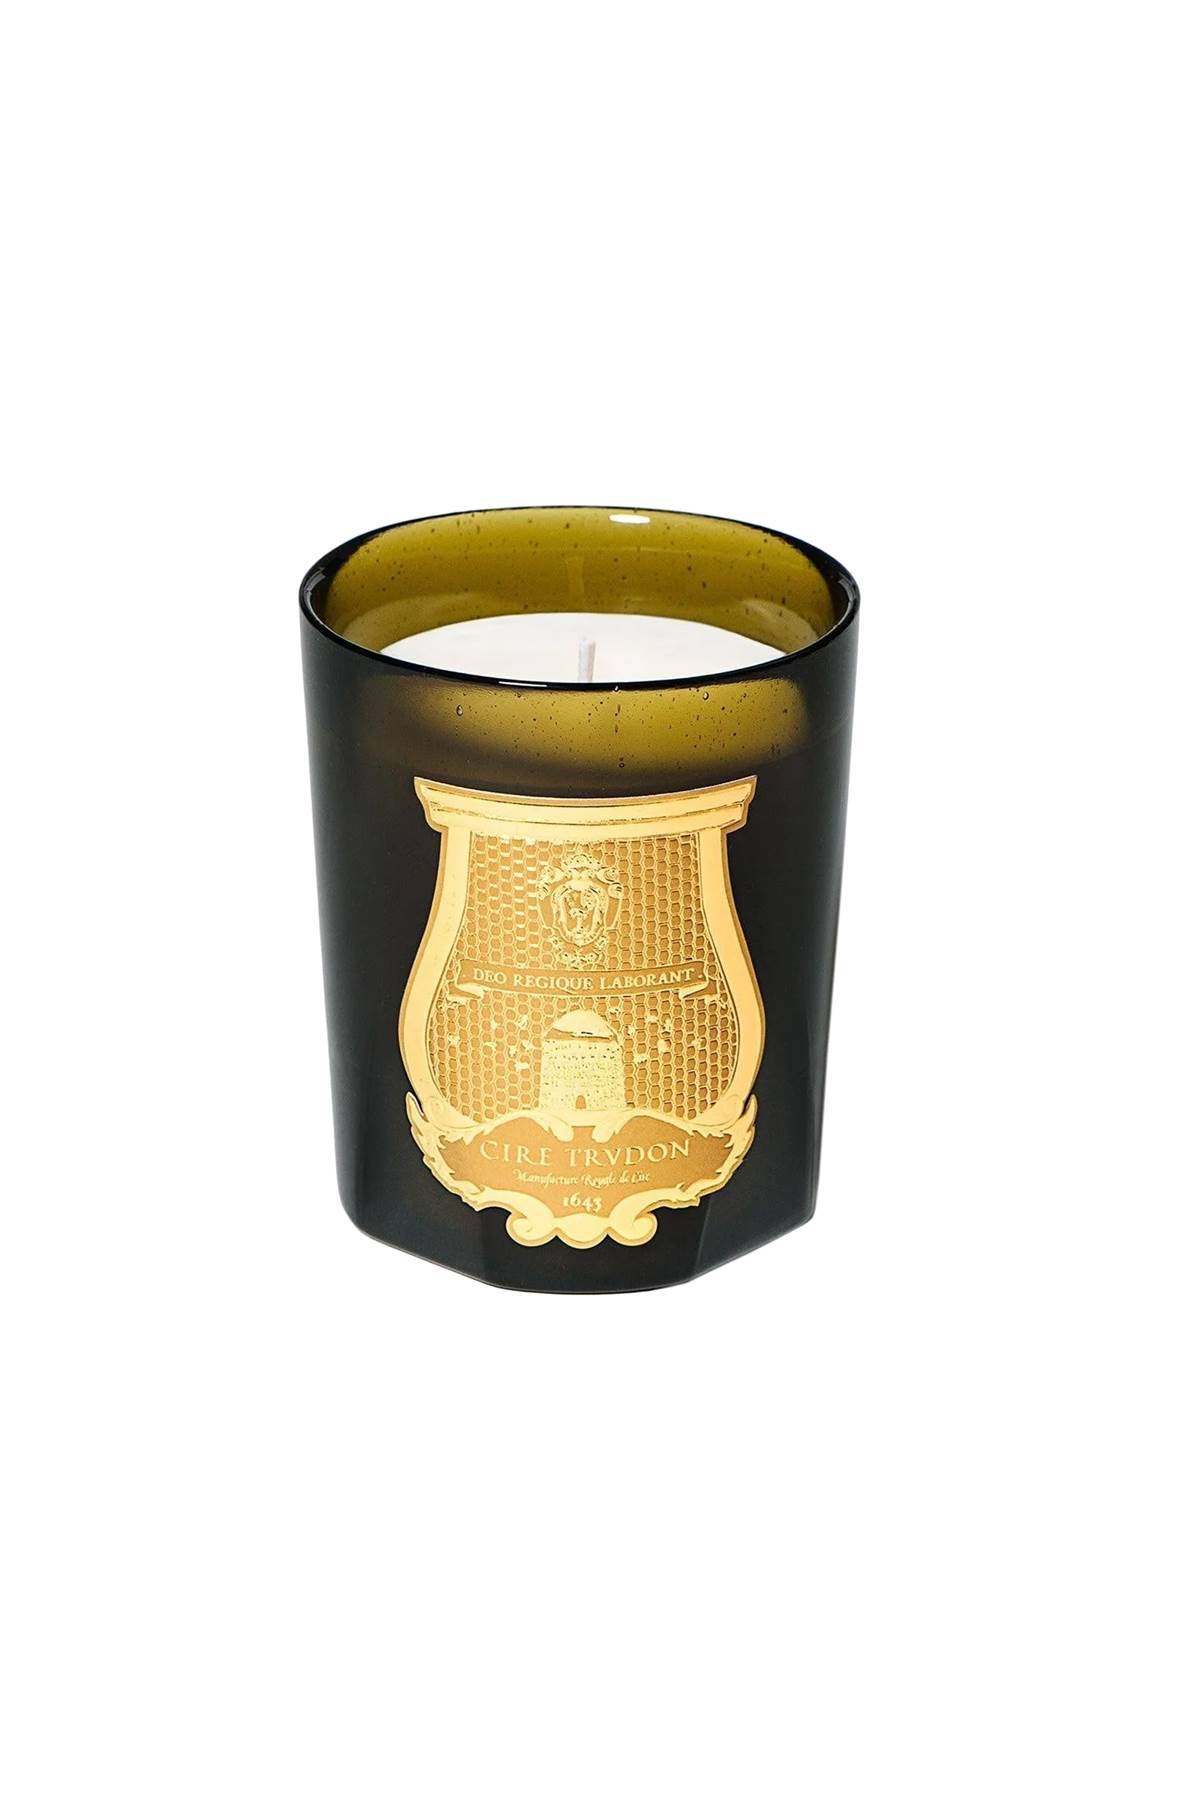 CIRE TRVDON scented candle solis rex -